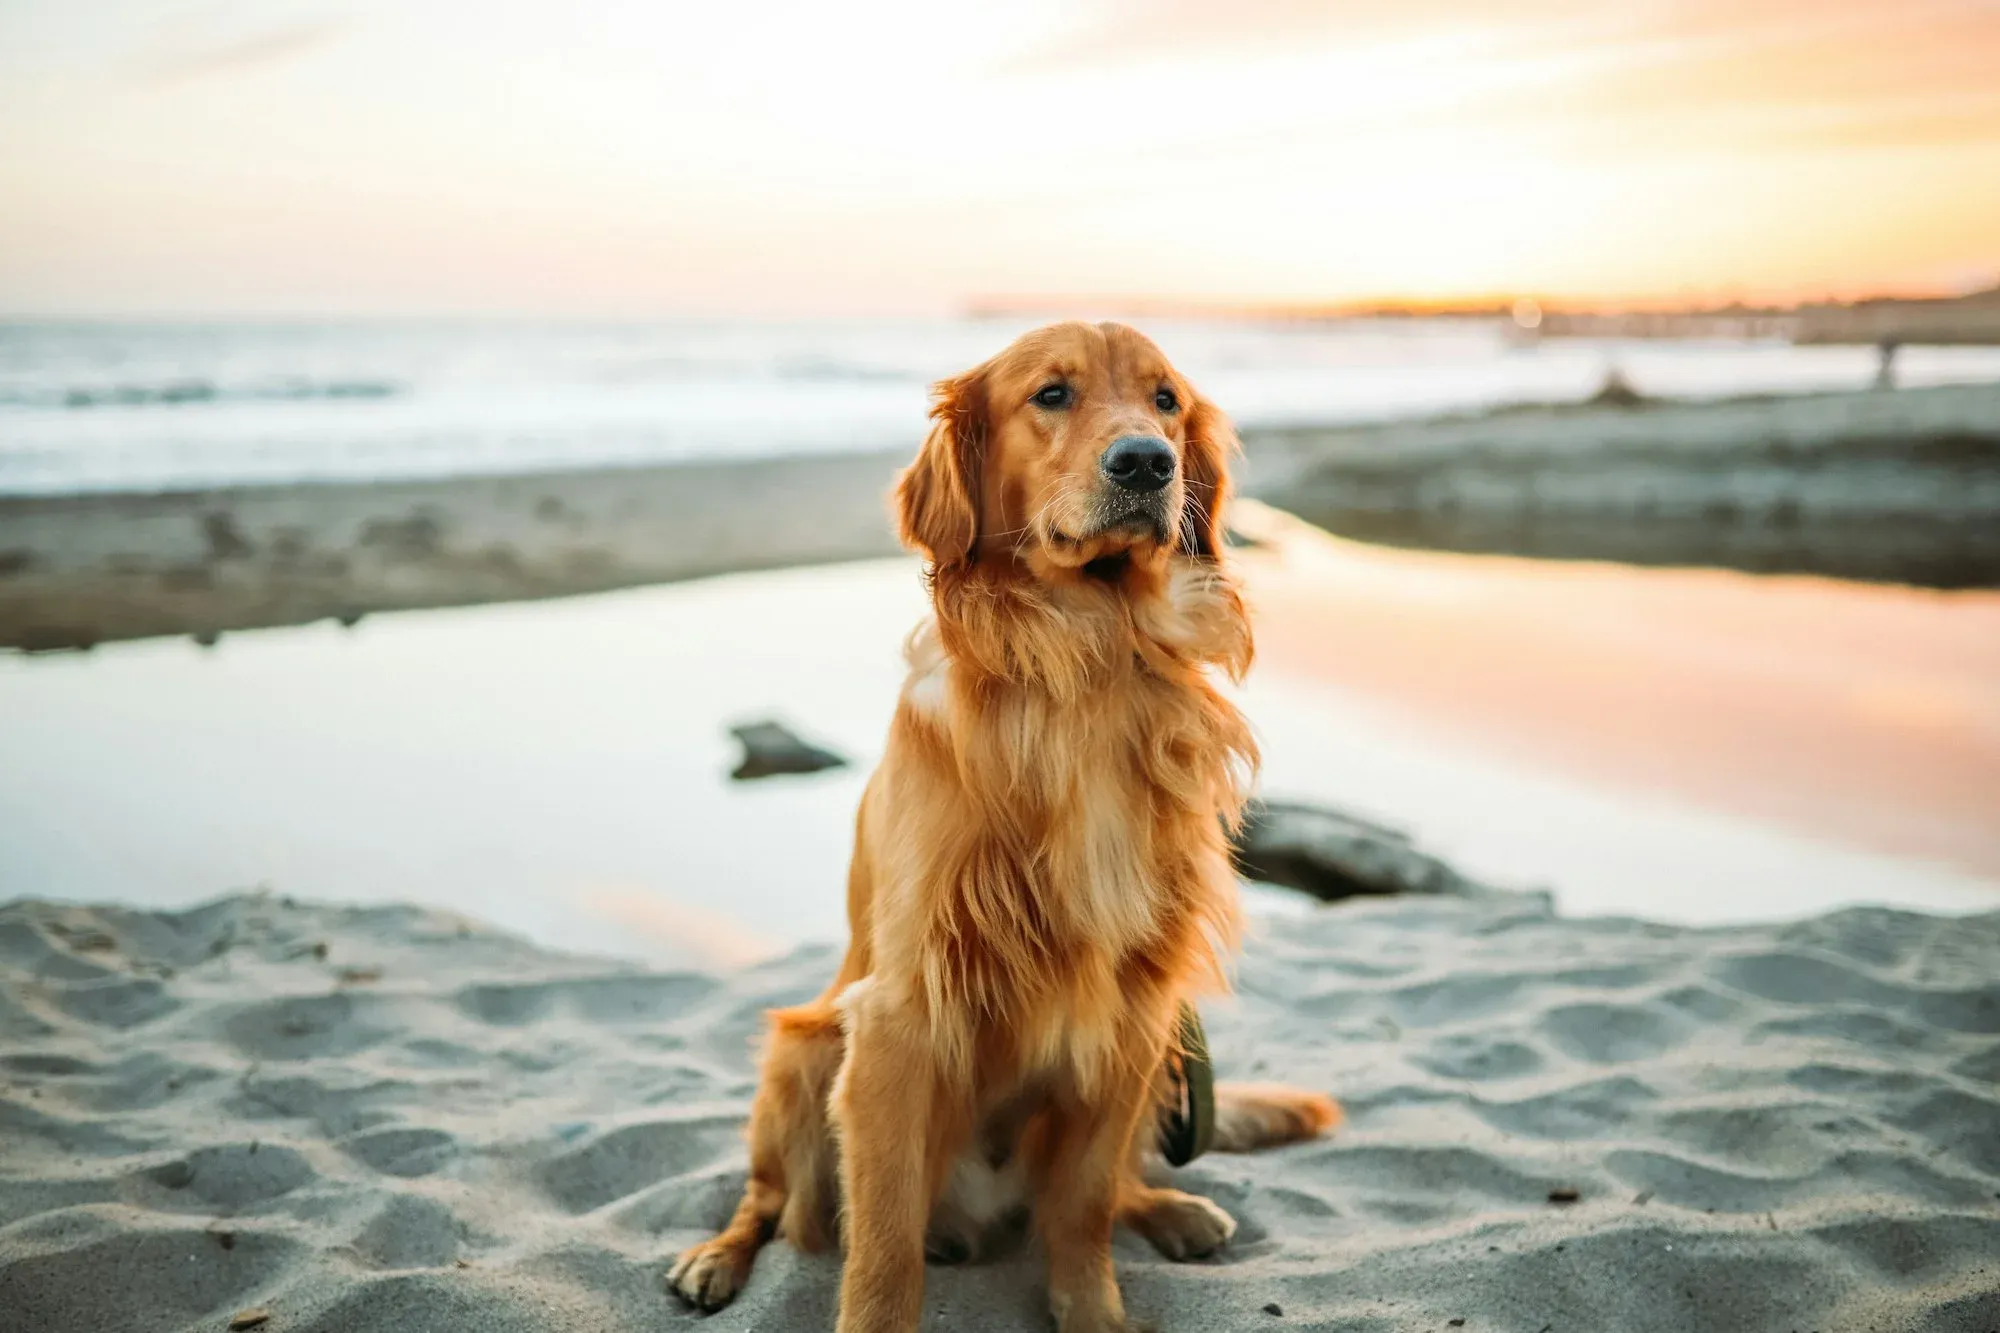 How to Train a Golden Retriever: The Importance of Mental Stimulation